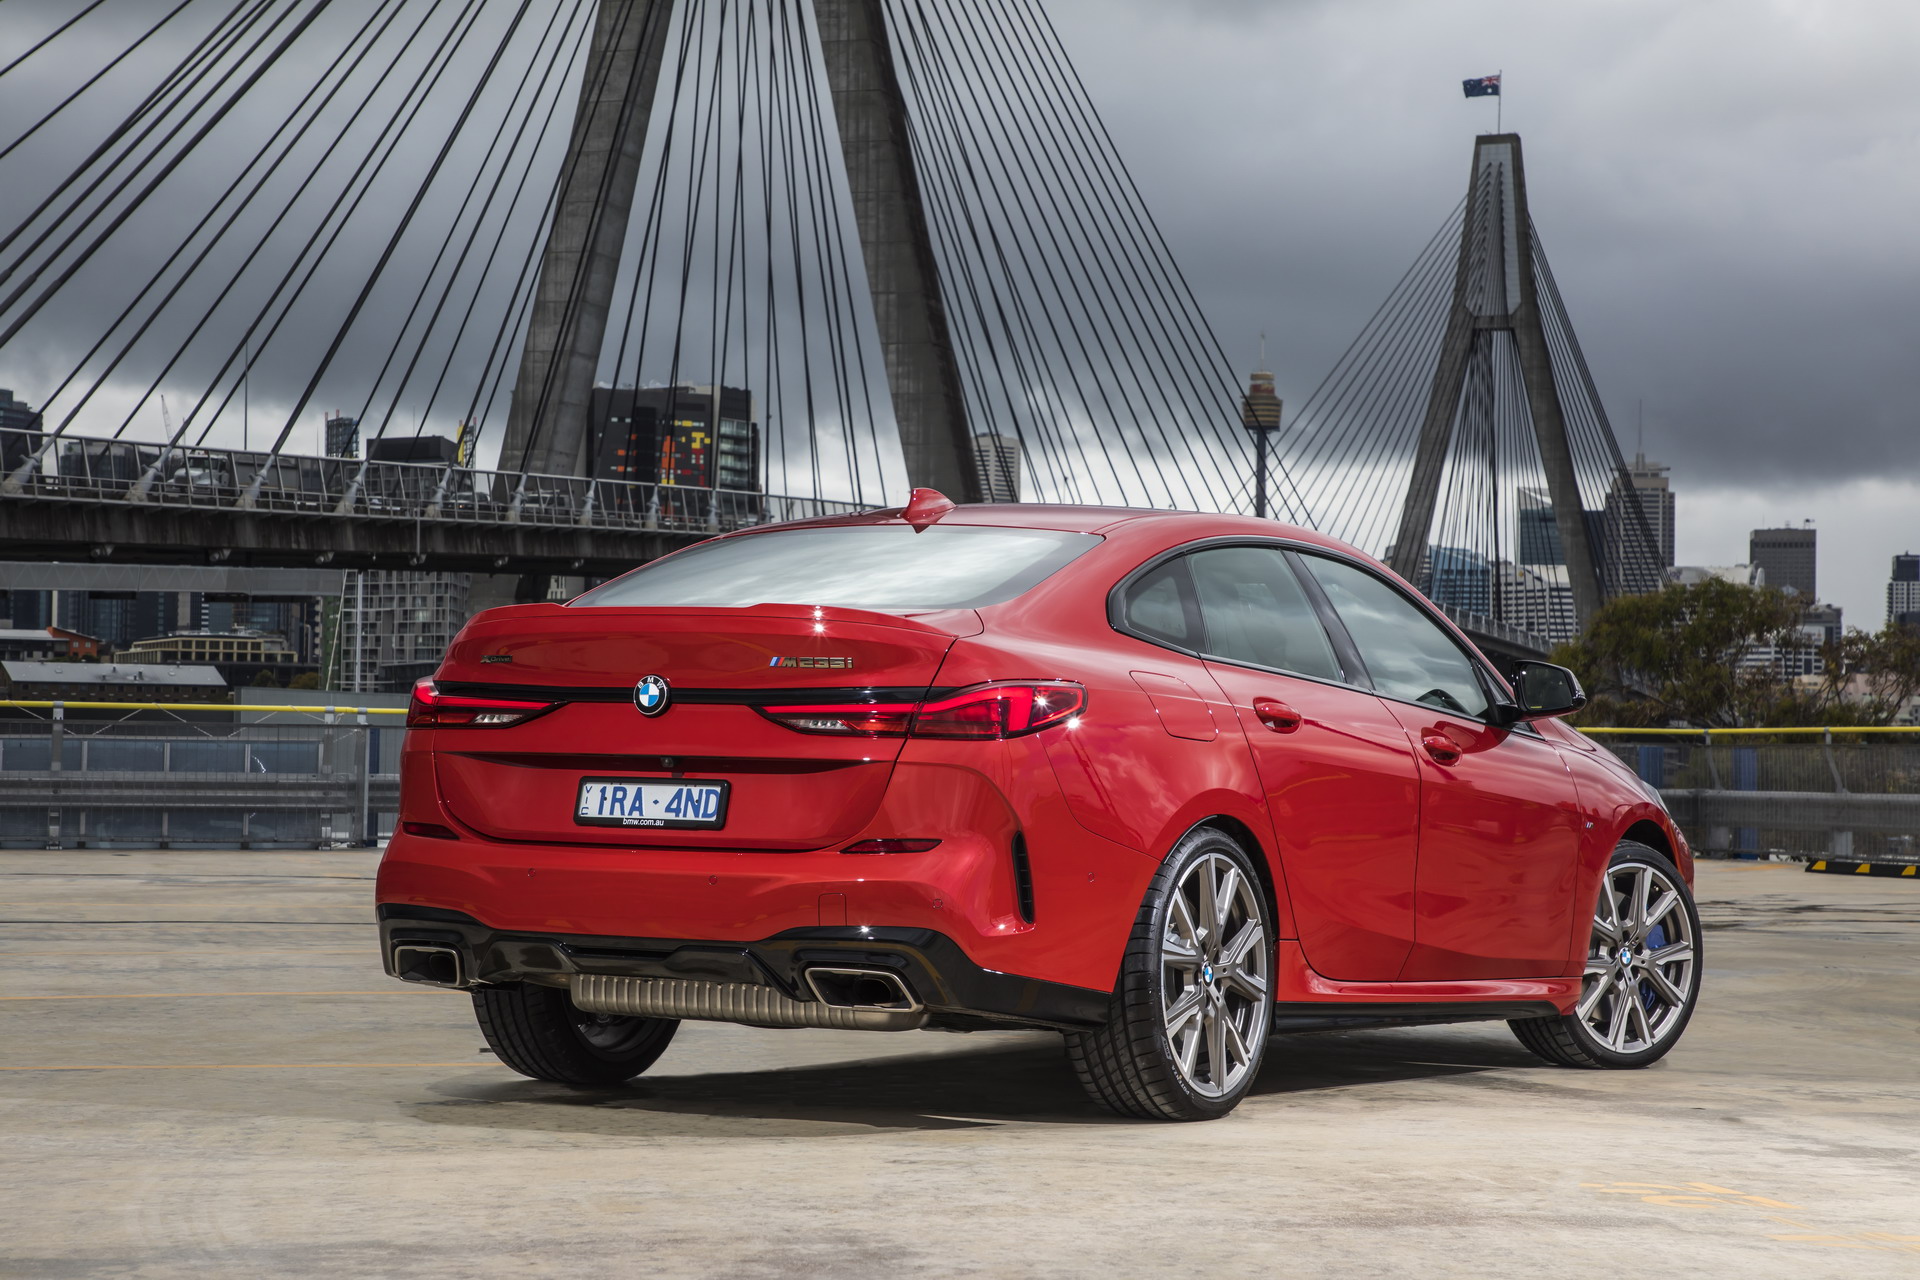 BMW M235i Gran Coupe in Melbourne Red, starting at AUD 69,990 in Australia